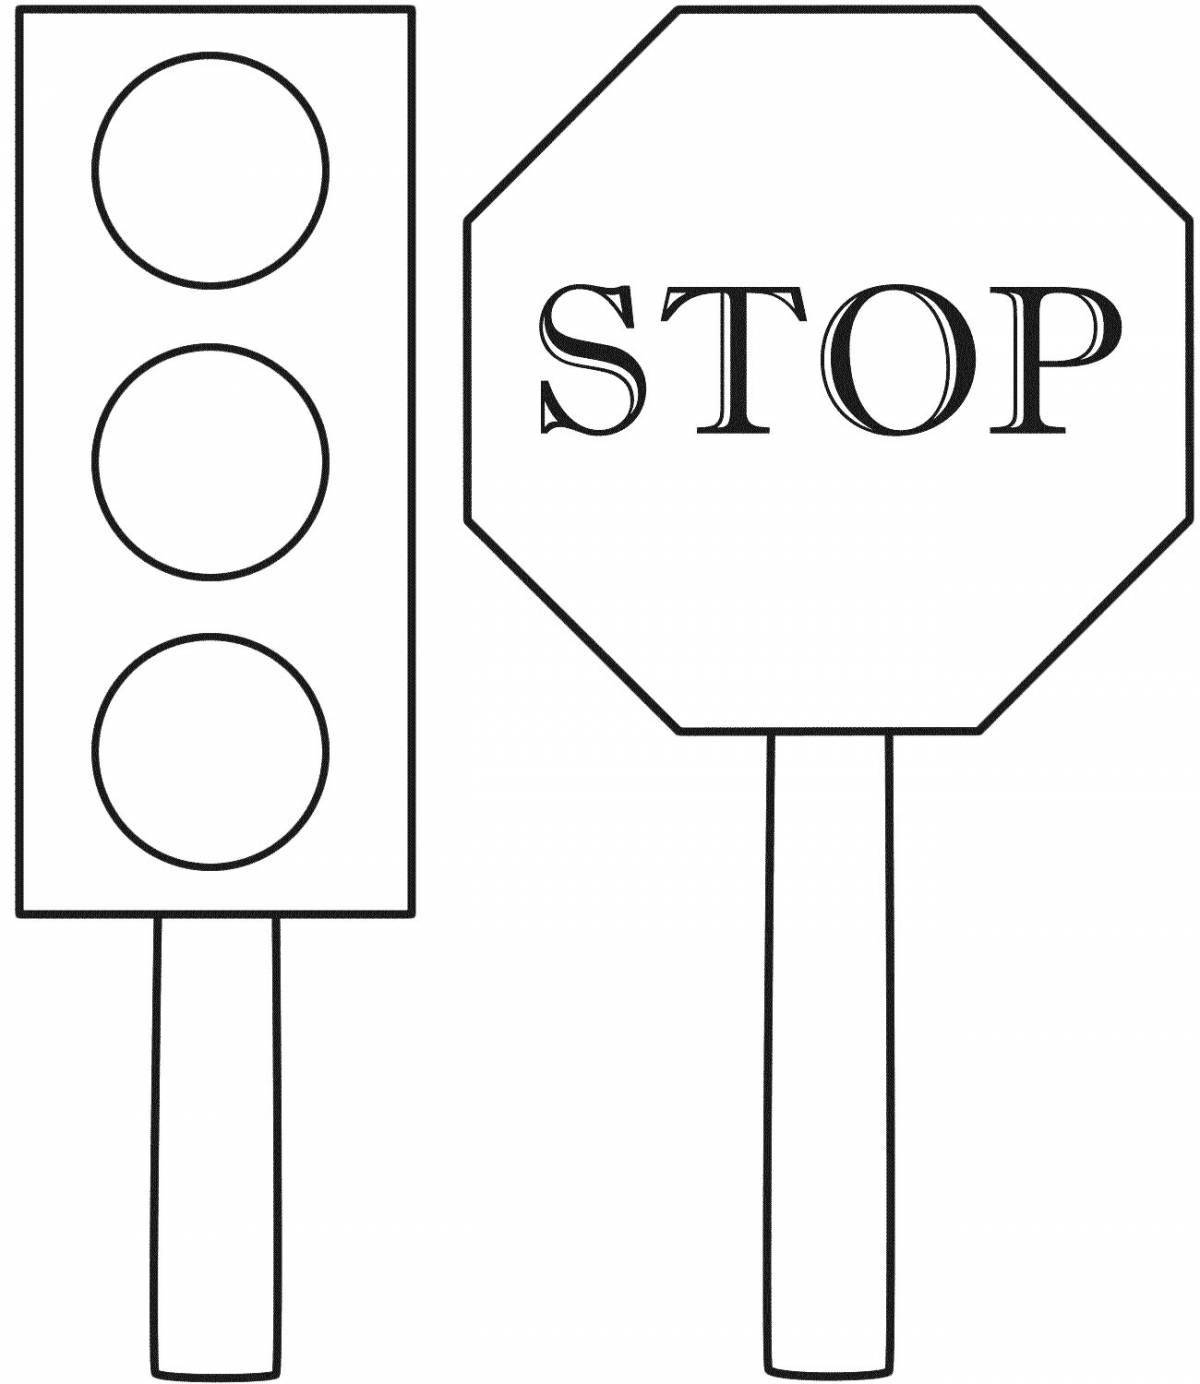 Inspirational road sign coloring book for elementary school